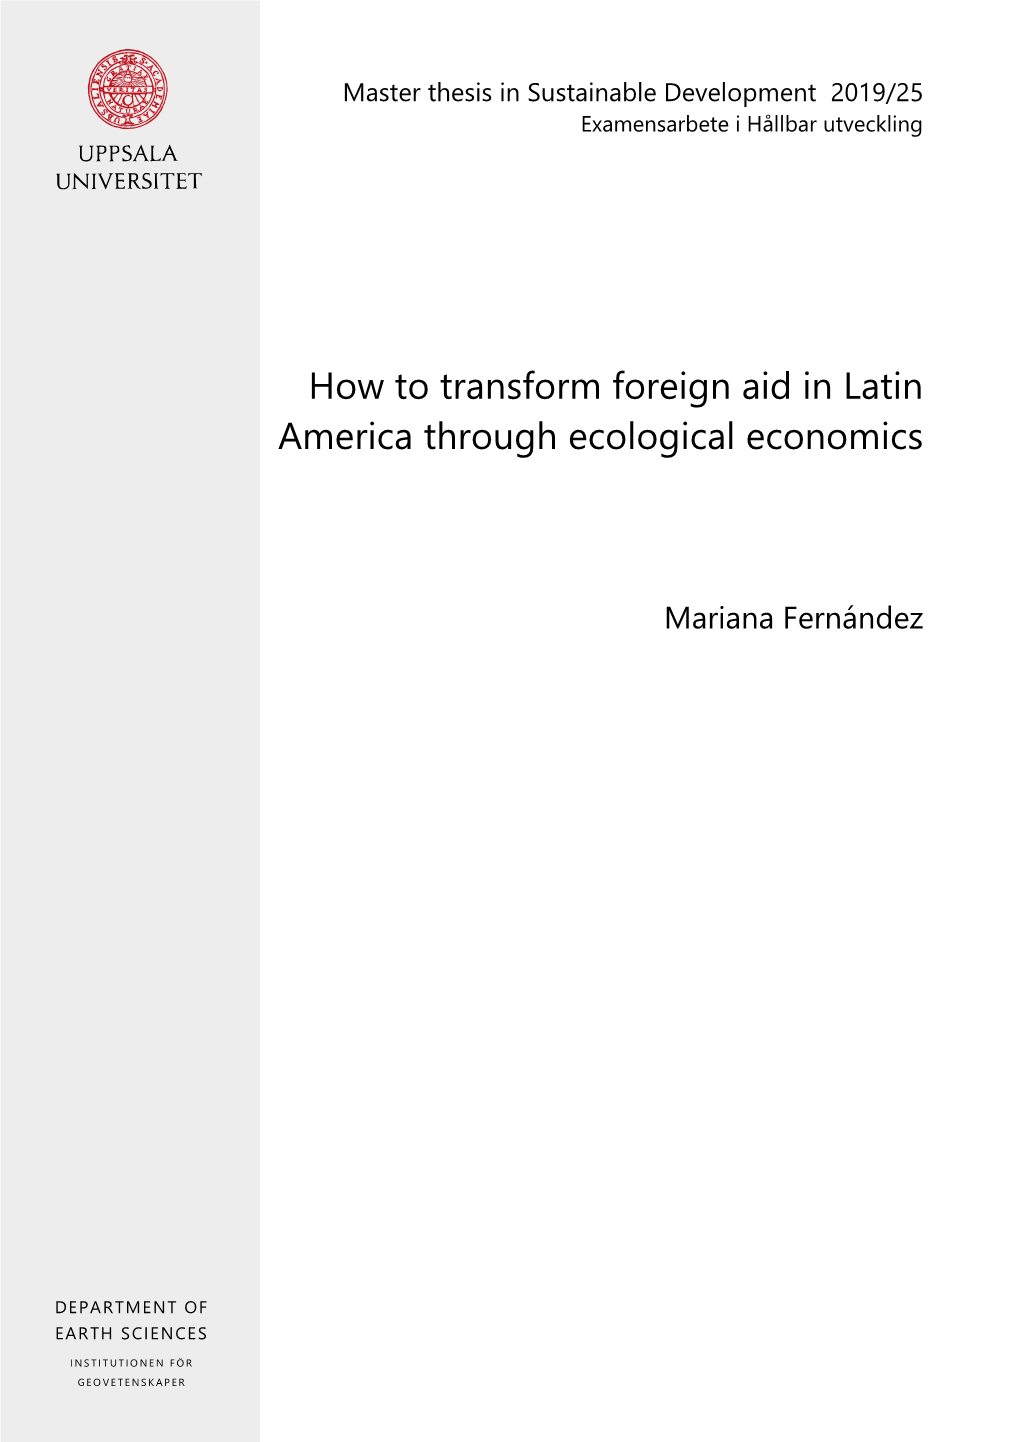 How to Transform Foreign Aid in Latin America Through Ecological Economics